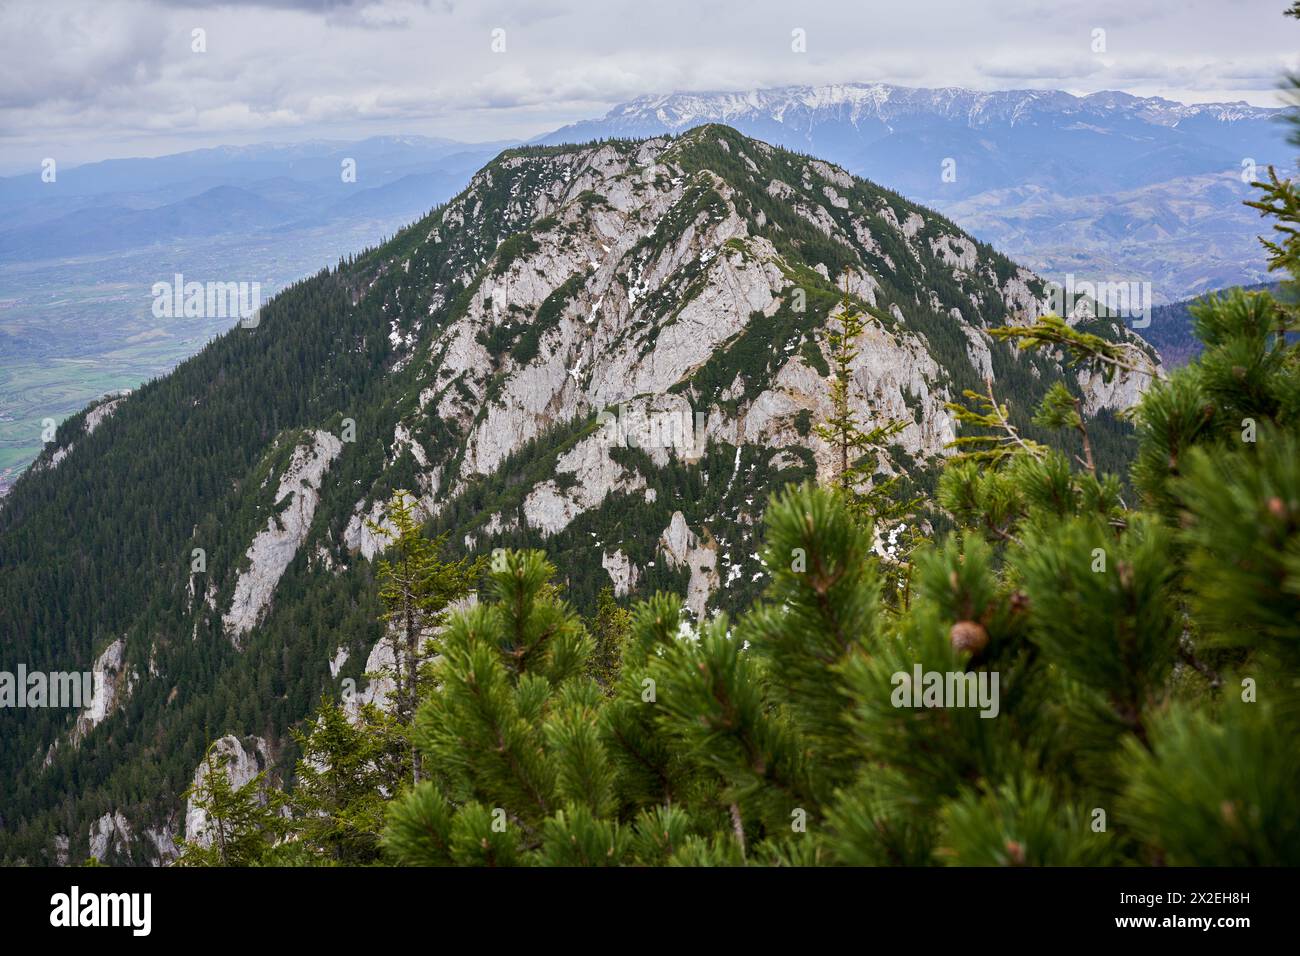 Landscape with mountains and pine forests in the early summer Stock Photo